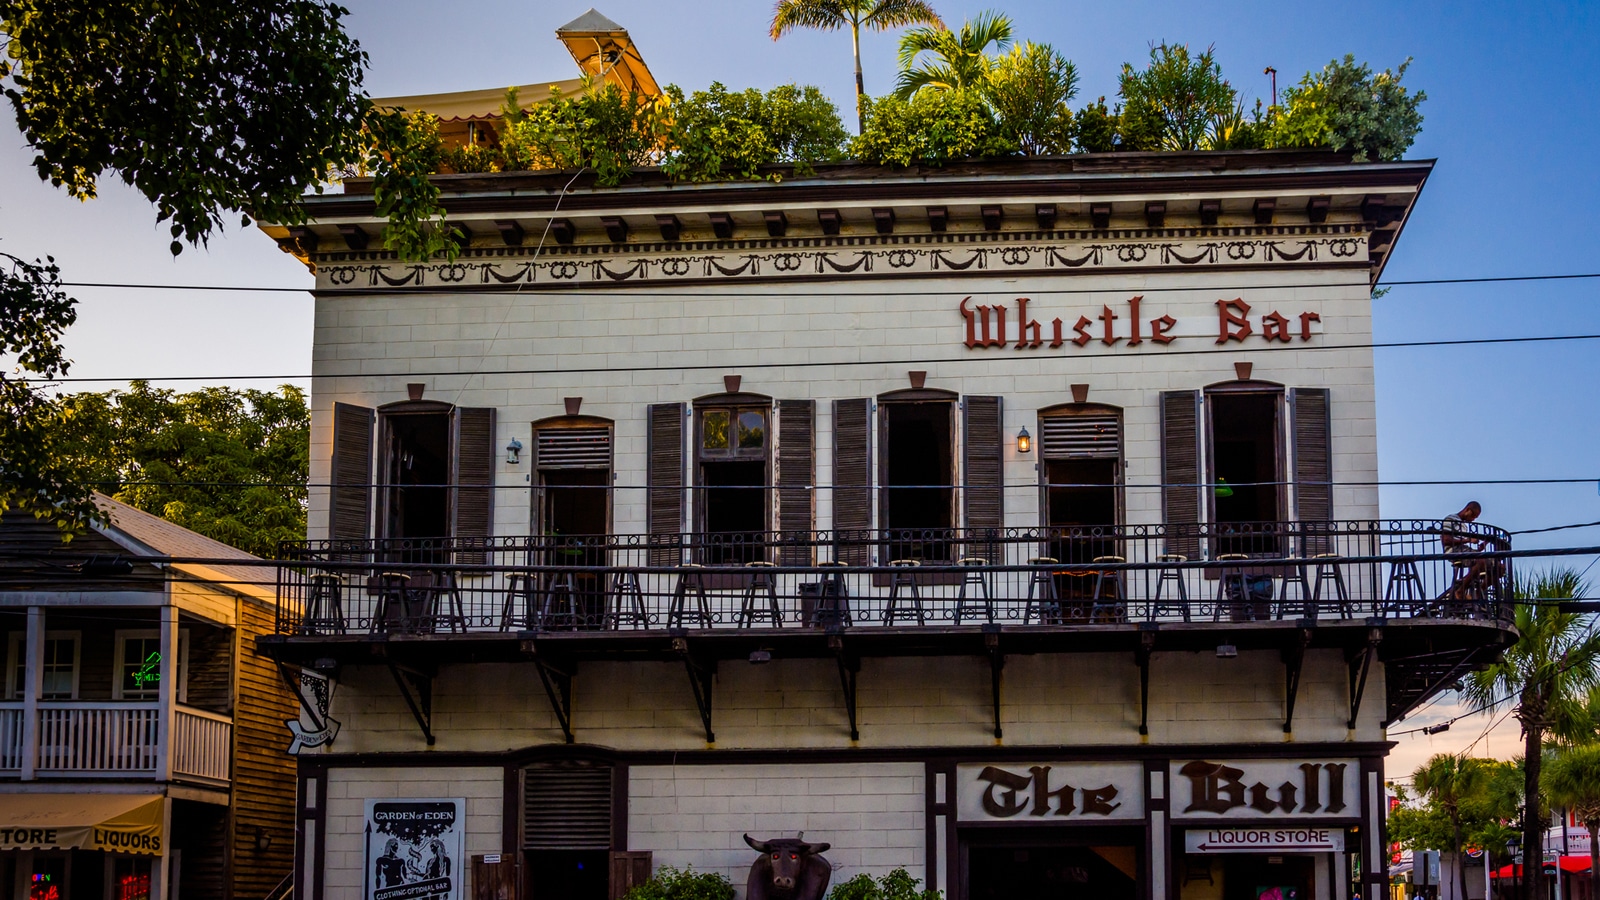 The Bull & Whistle Bar In Key West